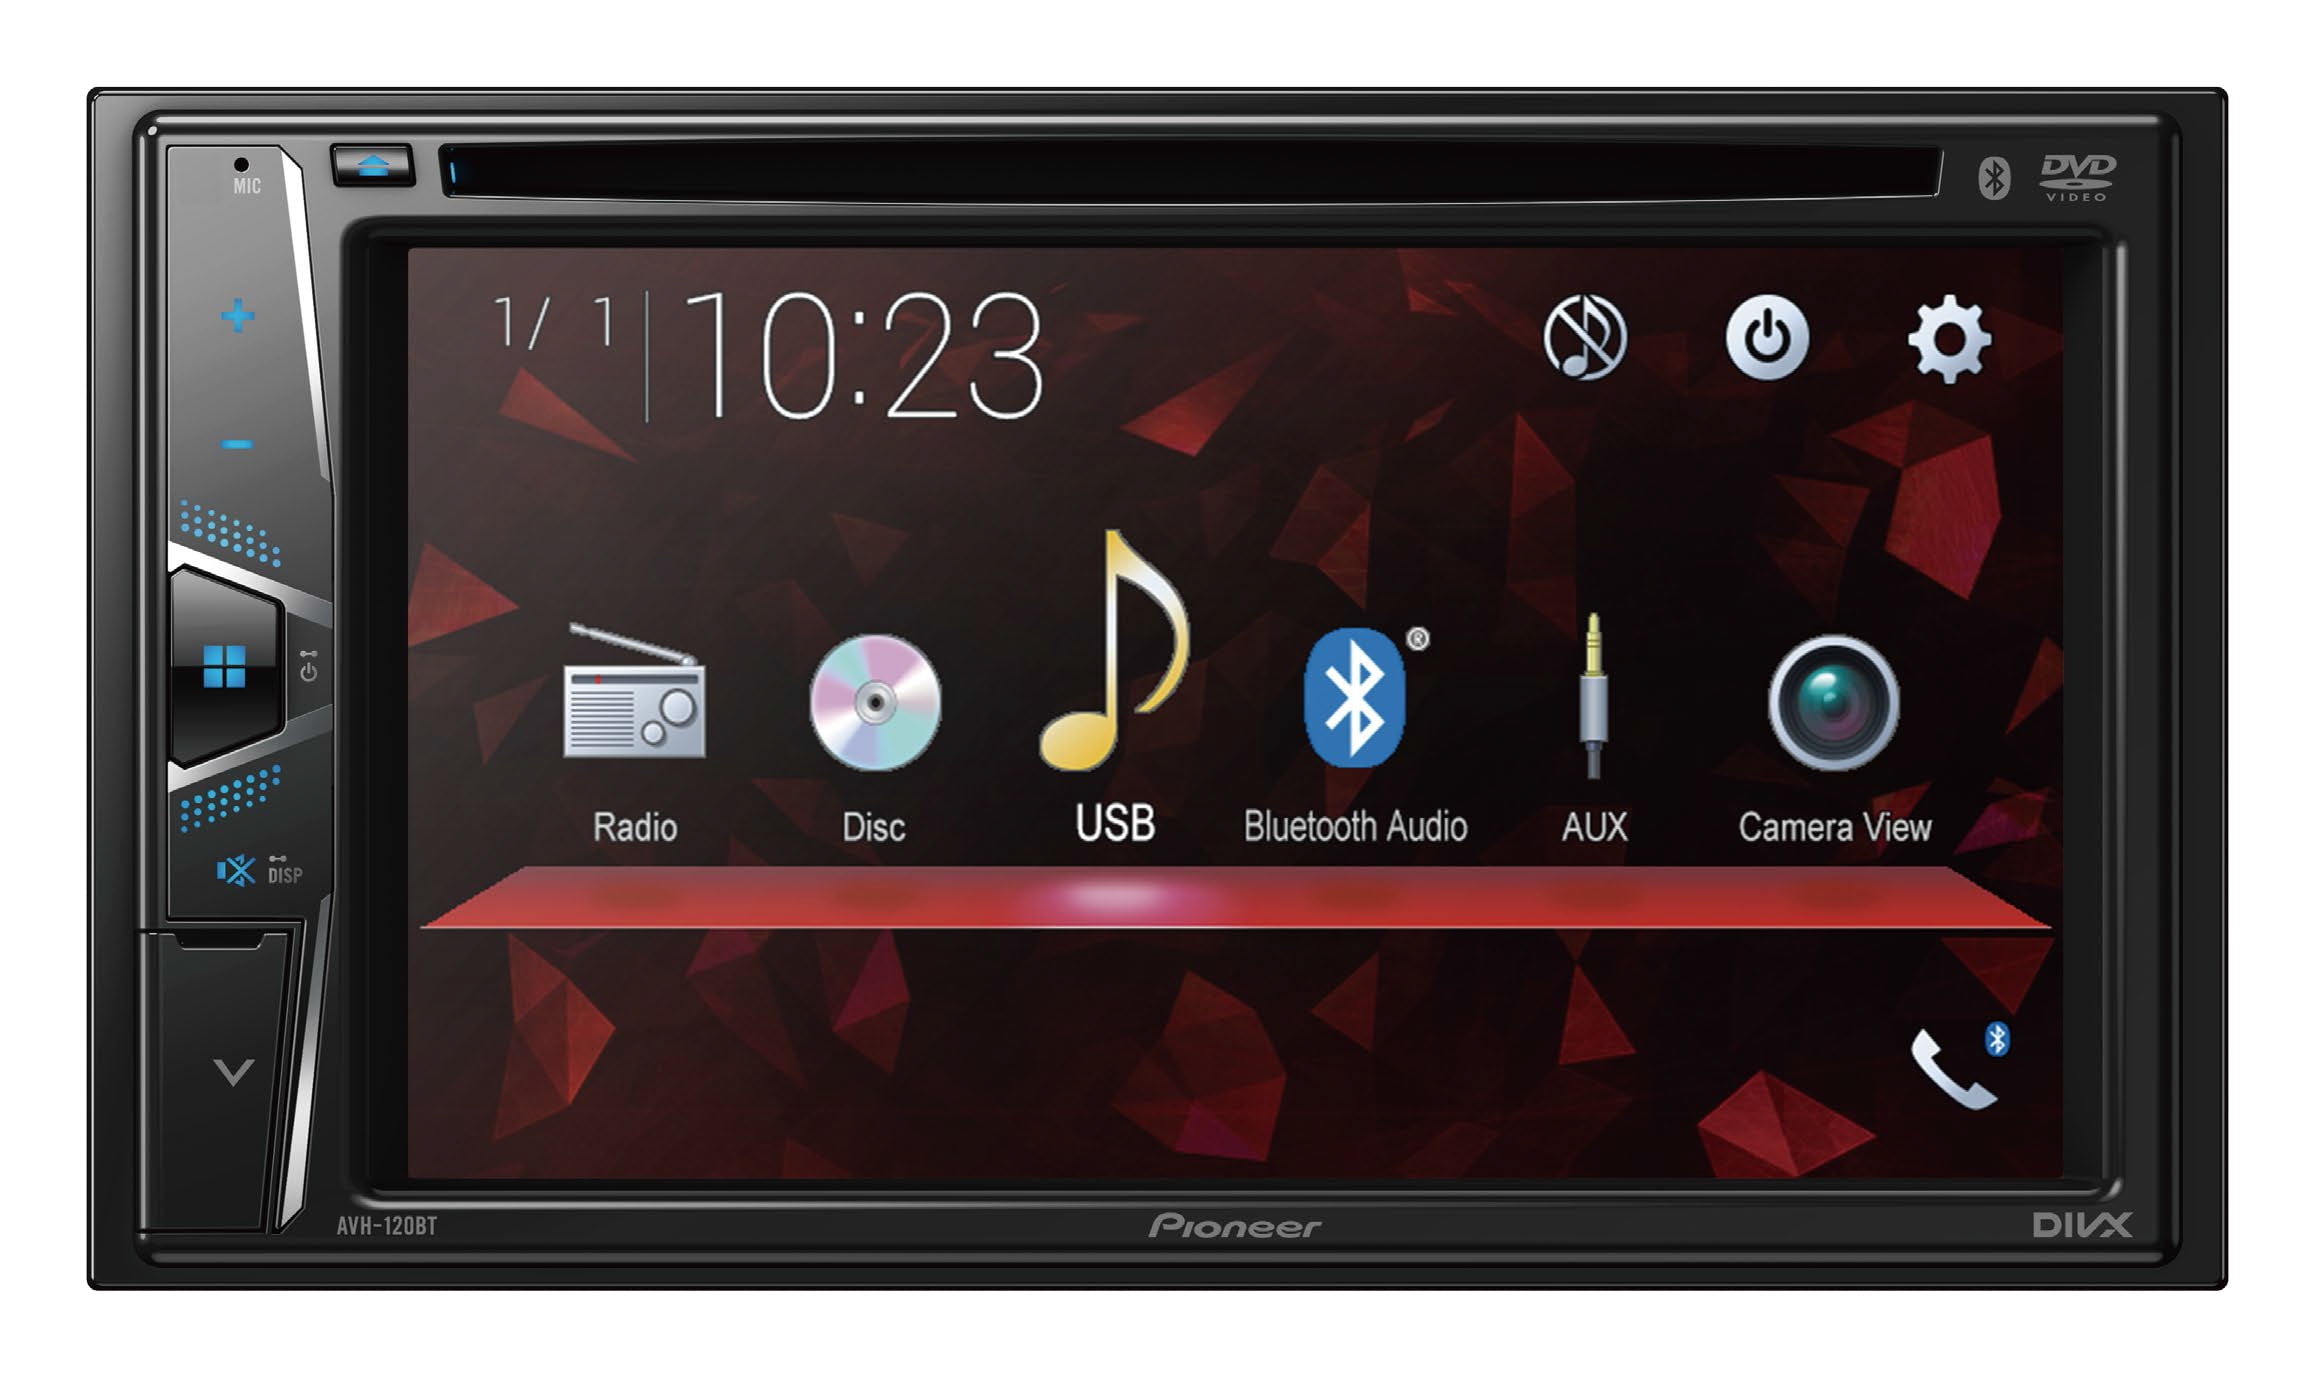 Pioneer AVH-120BT Multimedia DVD Receiver with 6.2 Inch WVGA Touchscreen Display and Built-in Bluetooth for Hands-free Calling and Audio Playback, Double DIN